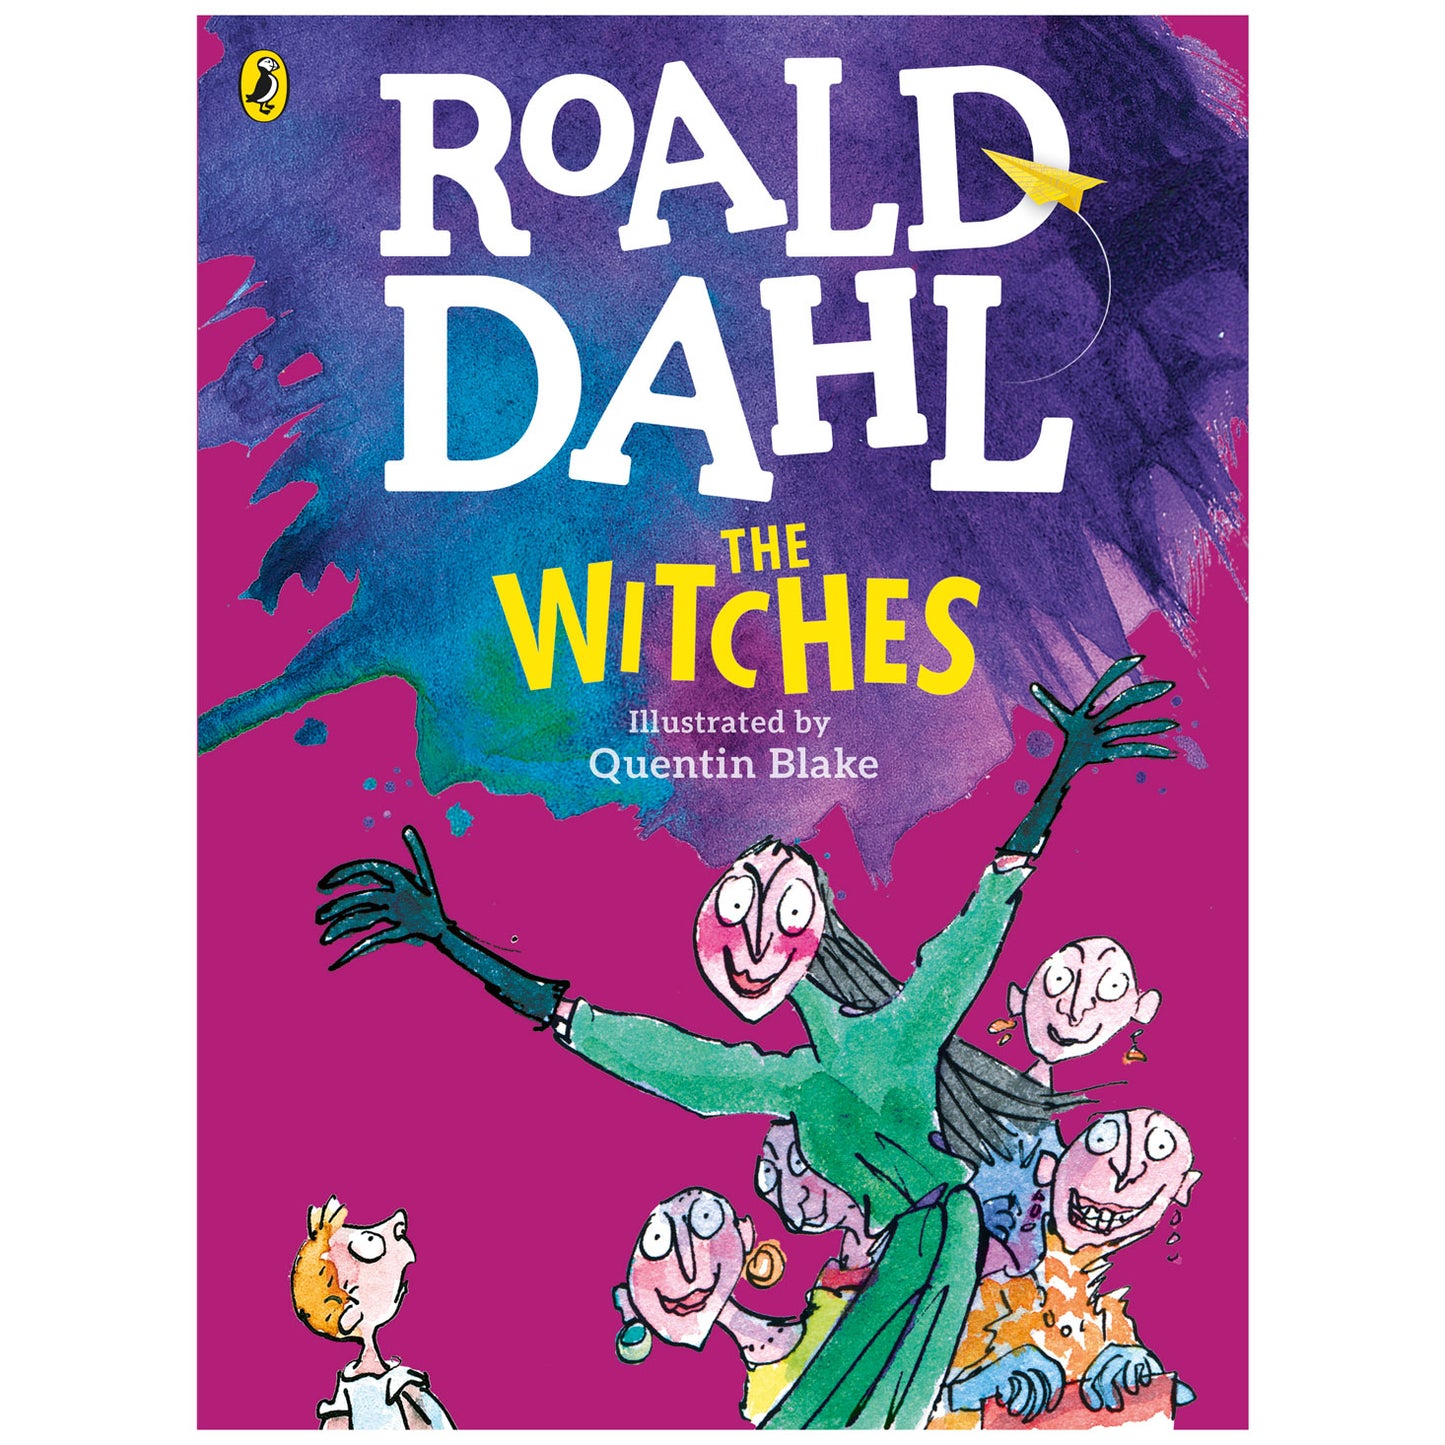 The Witches by Roald Dahl and illustrated by Quentin Blake